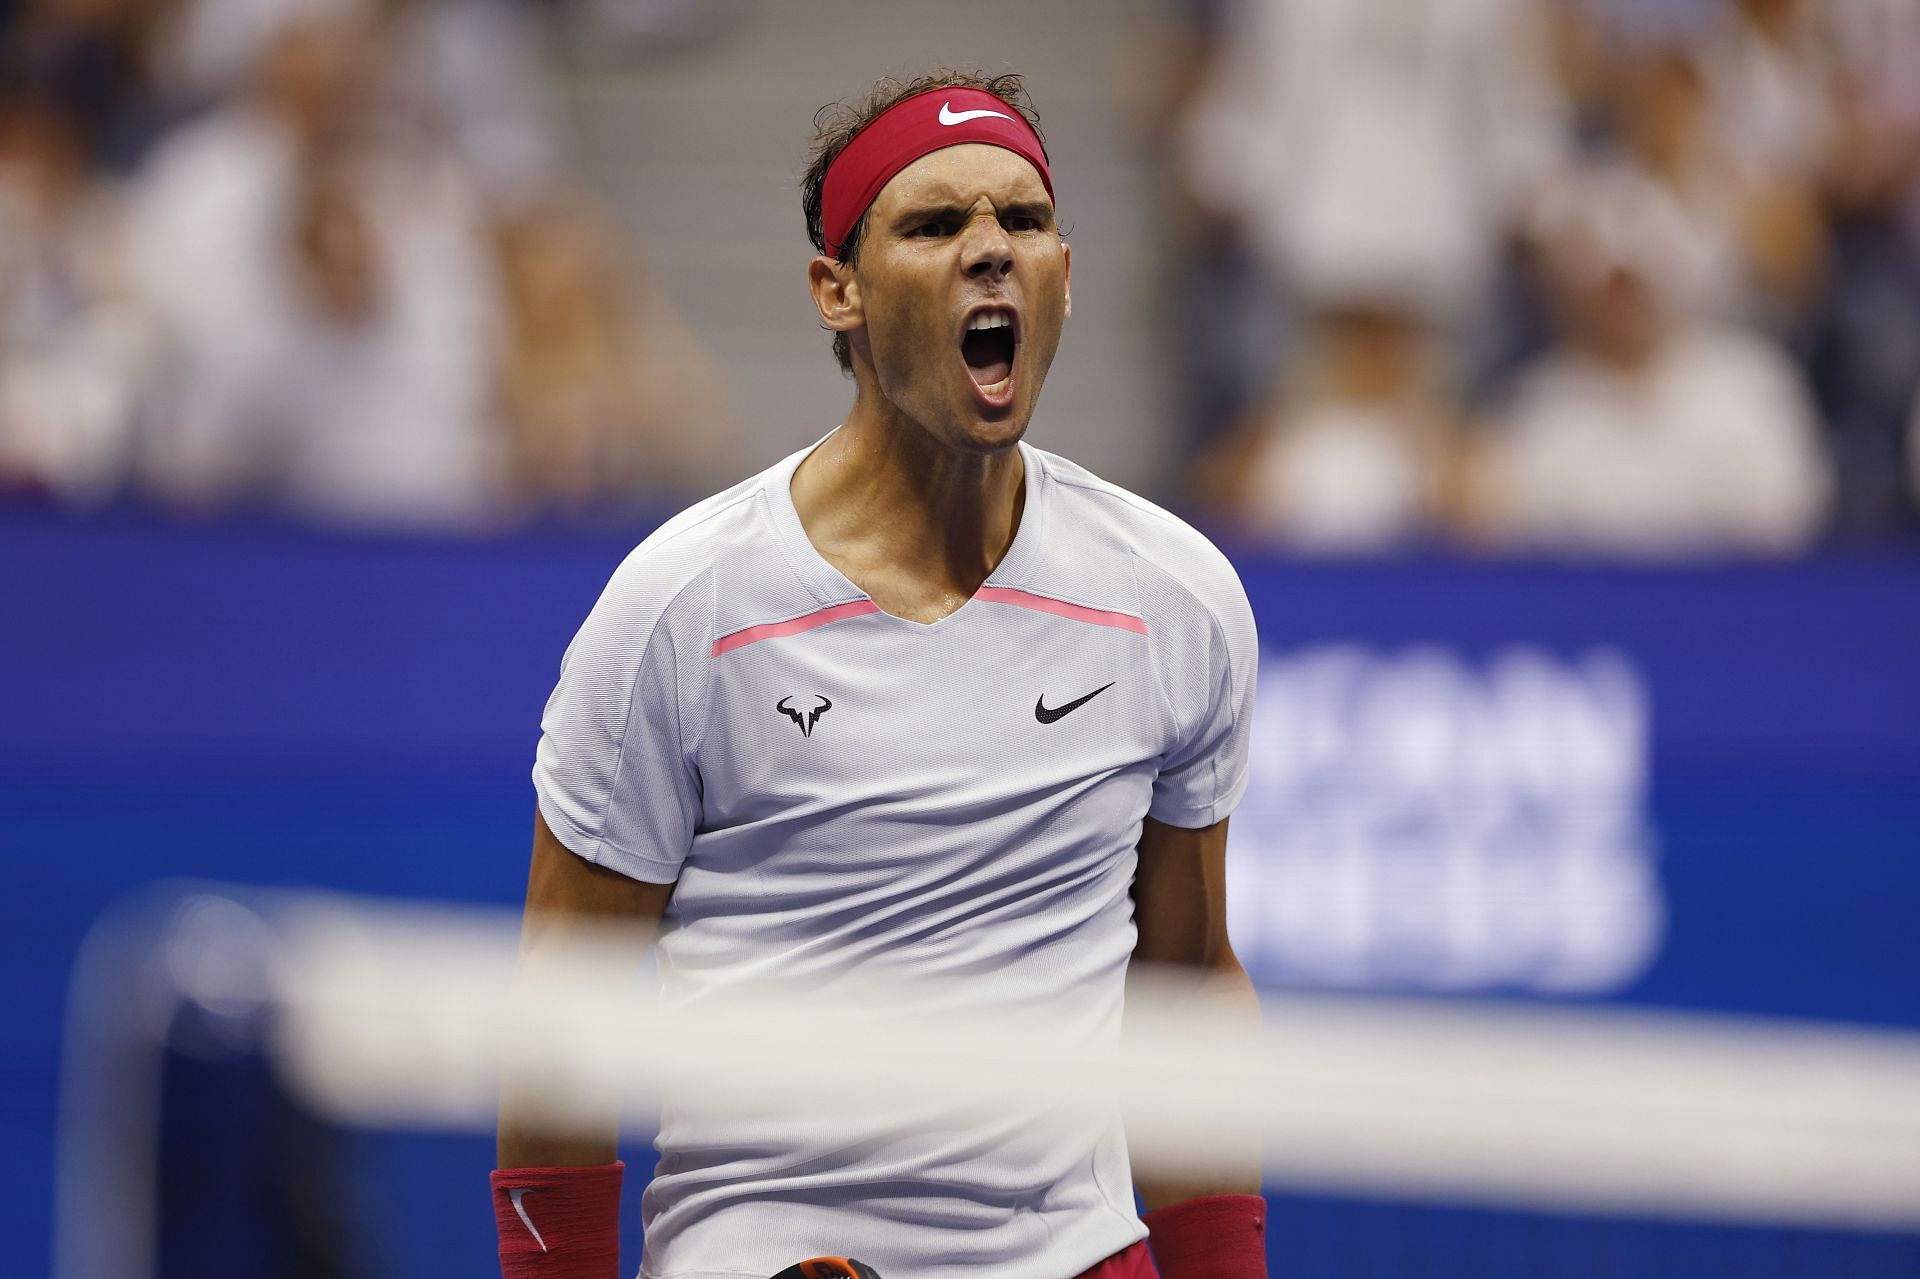 Rafael Nadal gears up to contest the year-end World No. 1 ranking